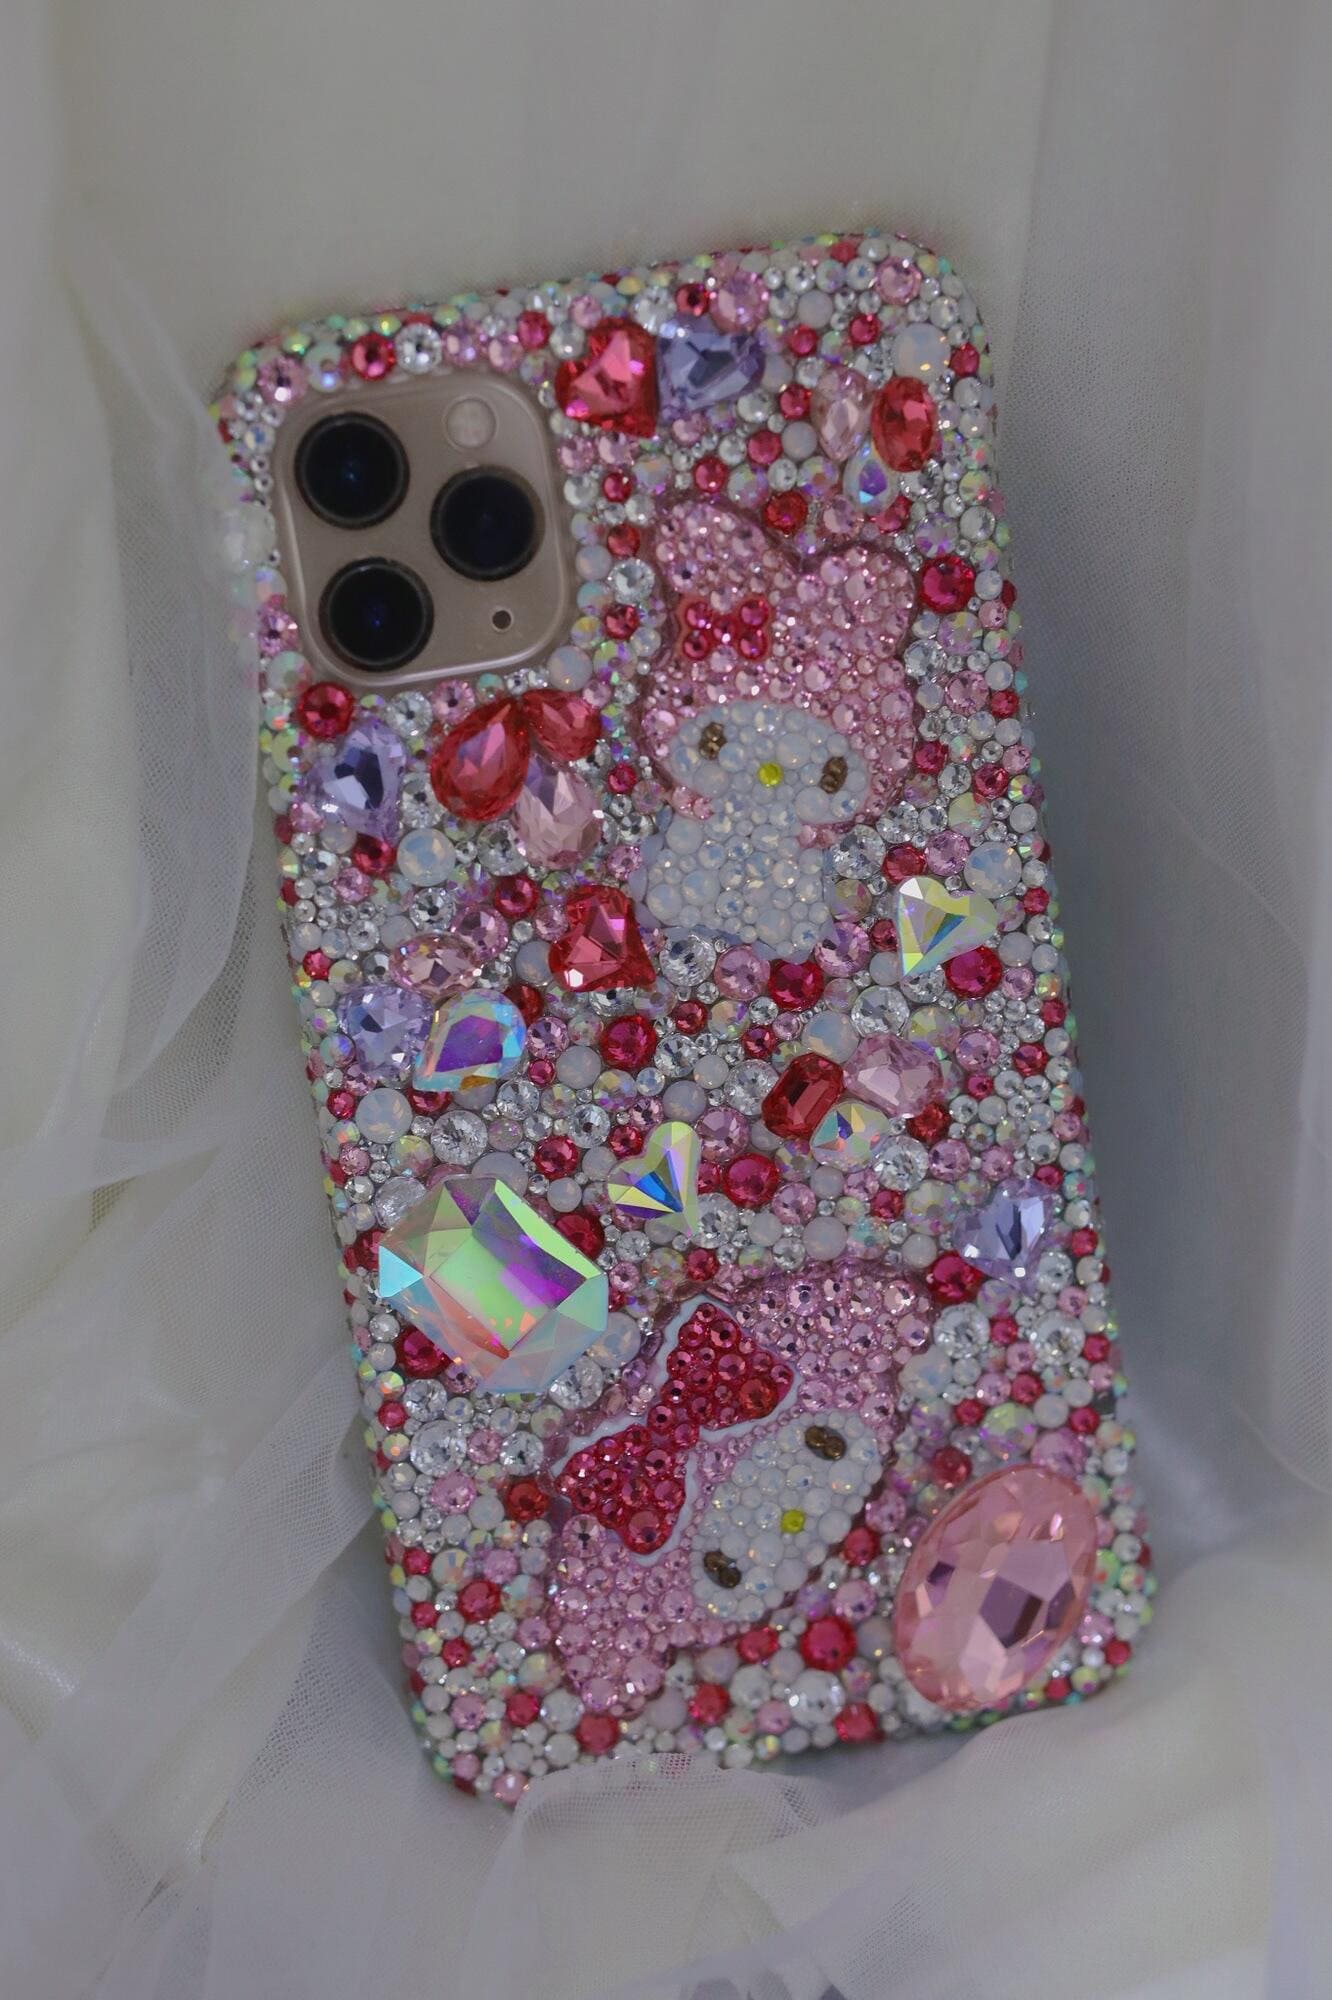 Compatible with iPhone 11 Pro max case Trunk Box Durable Luxury Glitter  Girly Cover Bumper fundas 6.5 inch (Pink)